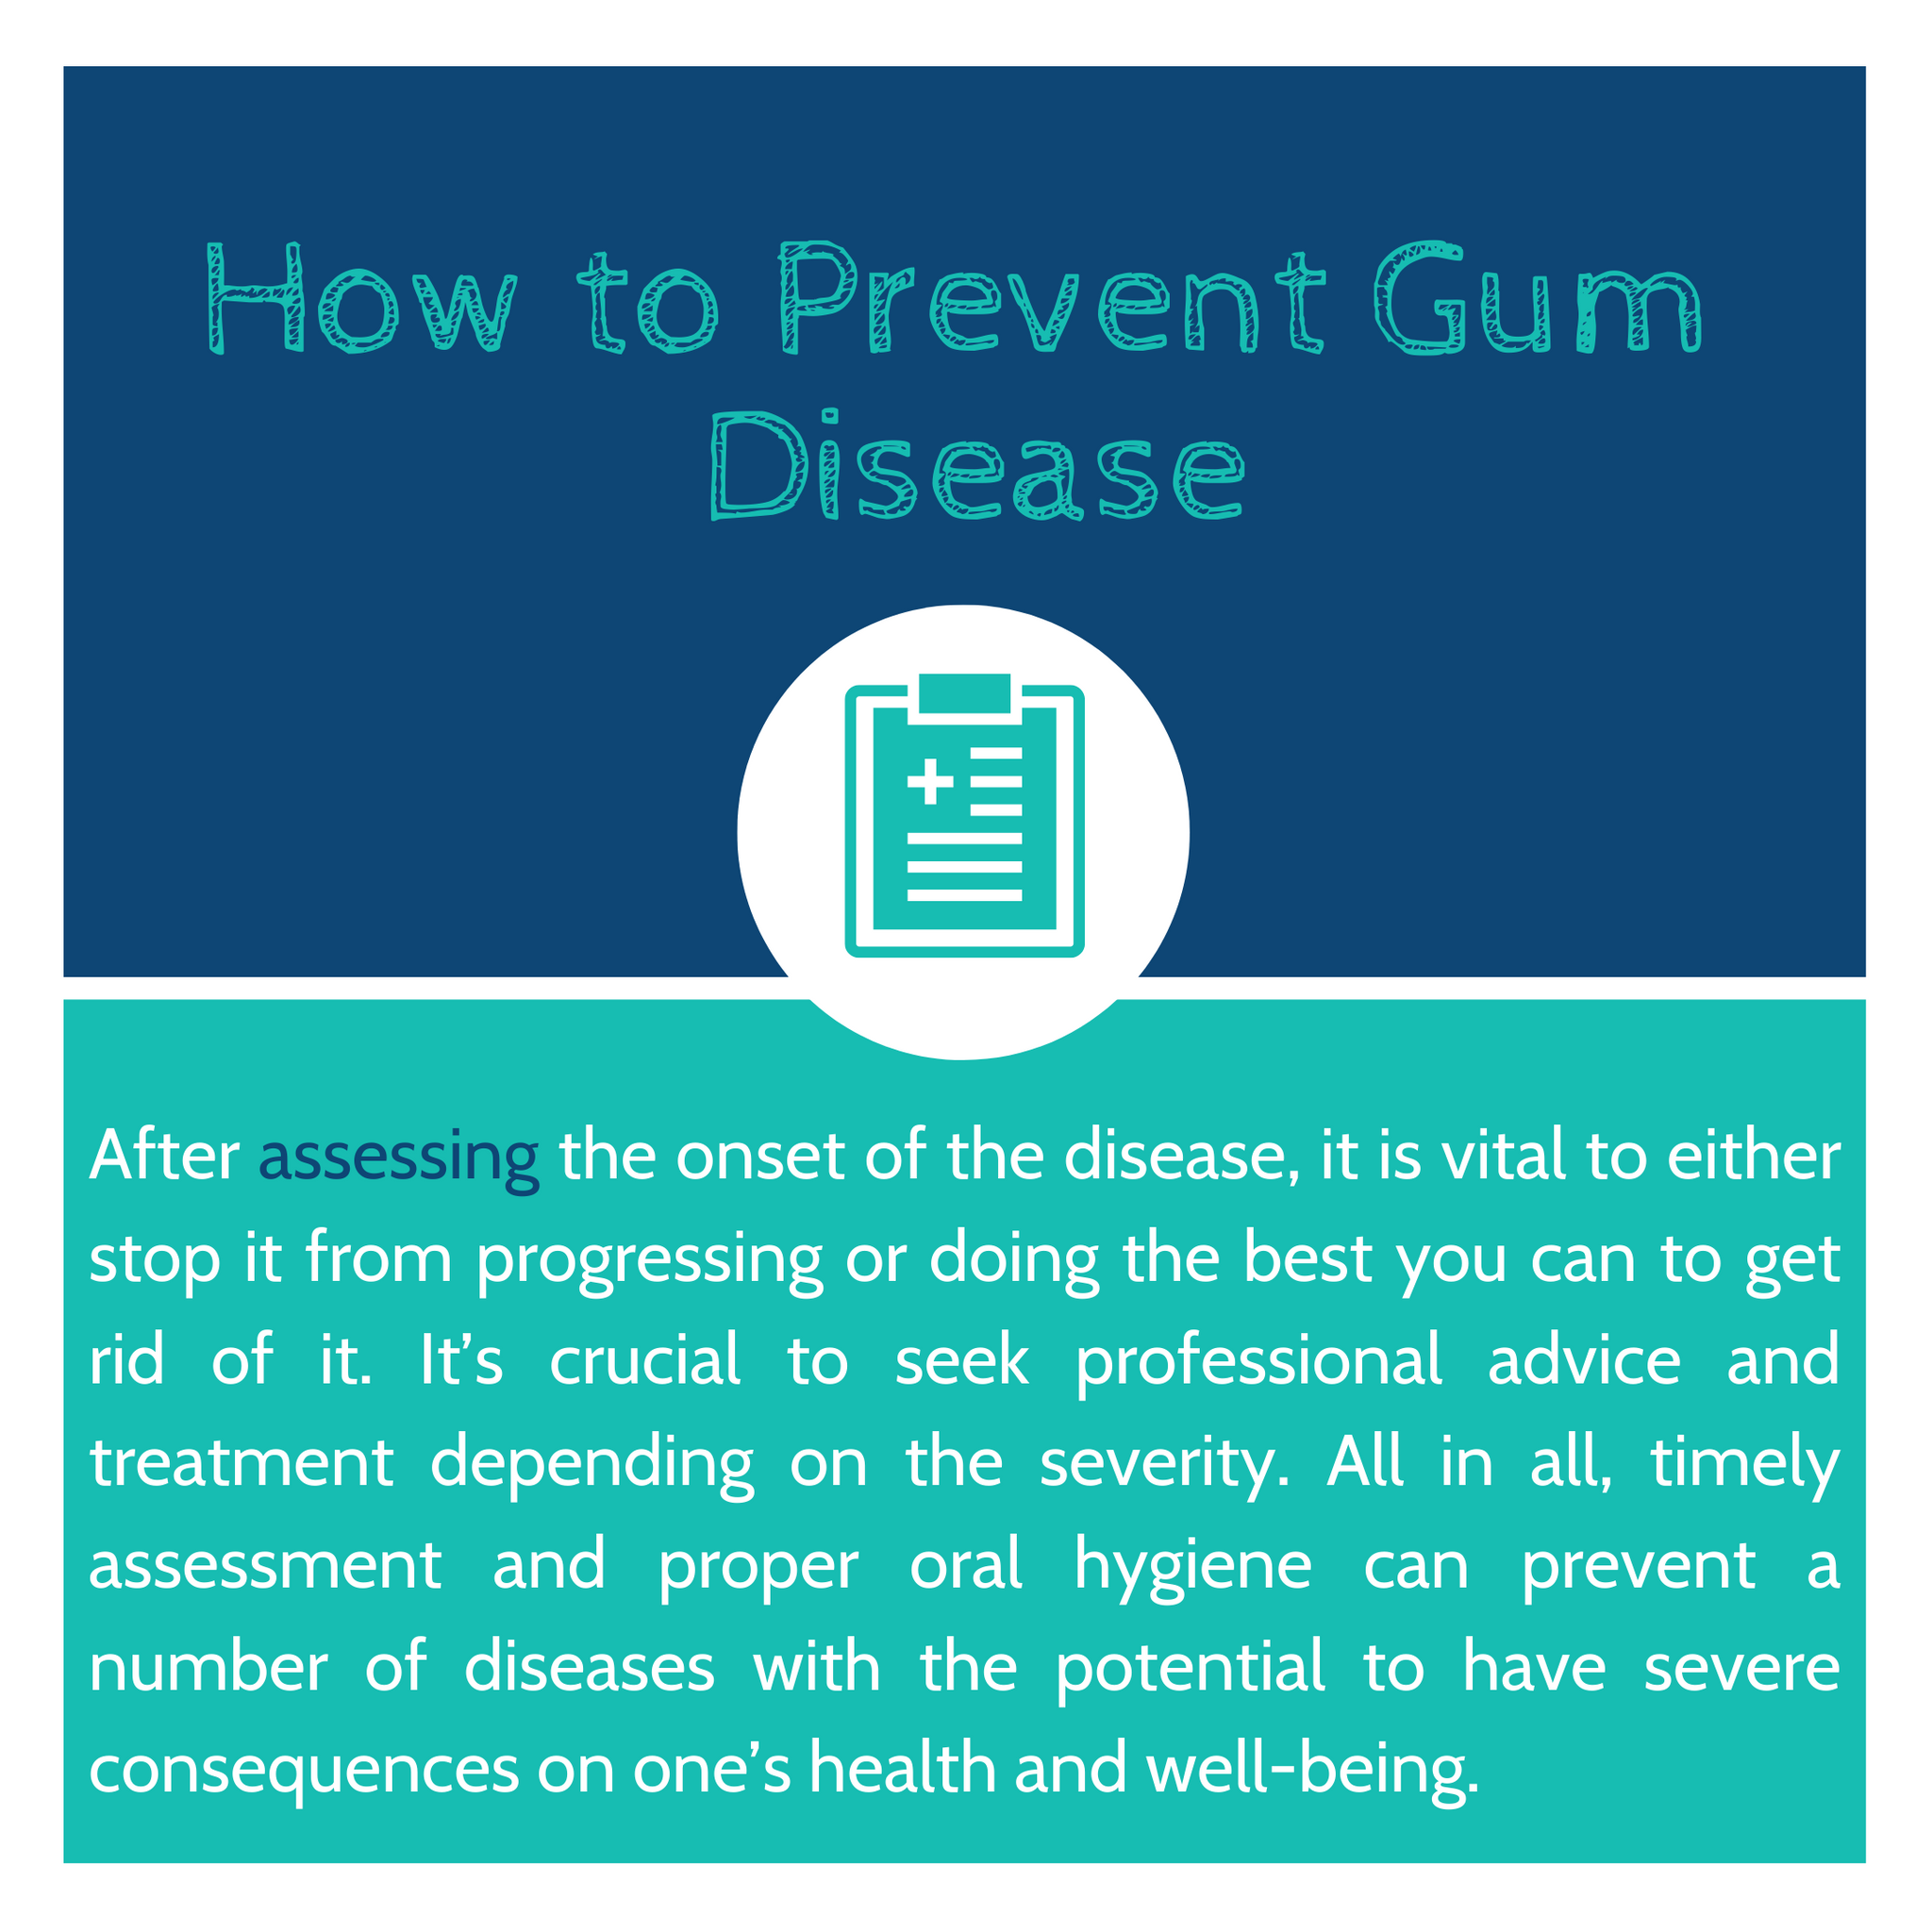 After assessing the onset of the disease, it is vital to either stop it from progressing or doing the best you can to get rid of it. It’s crucial to seek professional advice and treatment depending on the severity. All in all, timely assessment and proper oral hygiene can prevent a number of diseases with the potential to have severe consequences on one’s health and well-being.